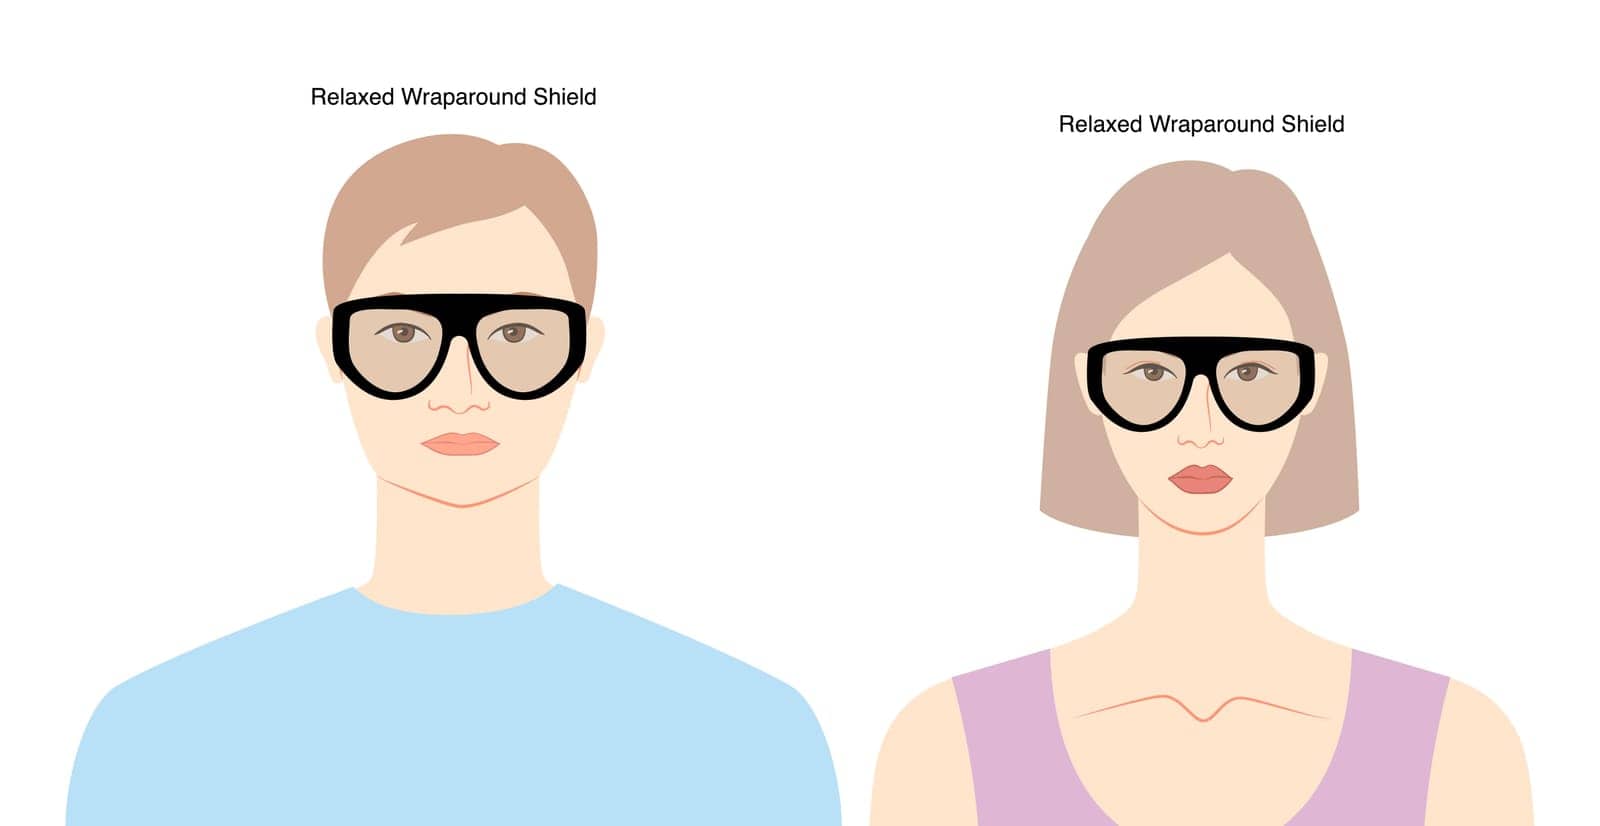 Relaxed Wraparound Shield frame glasses on women and men flat character fashion accessory illustration. Sunglass by Vectoressa